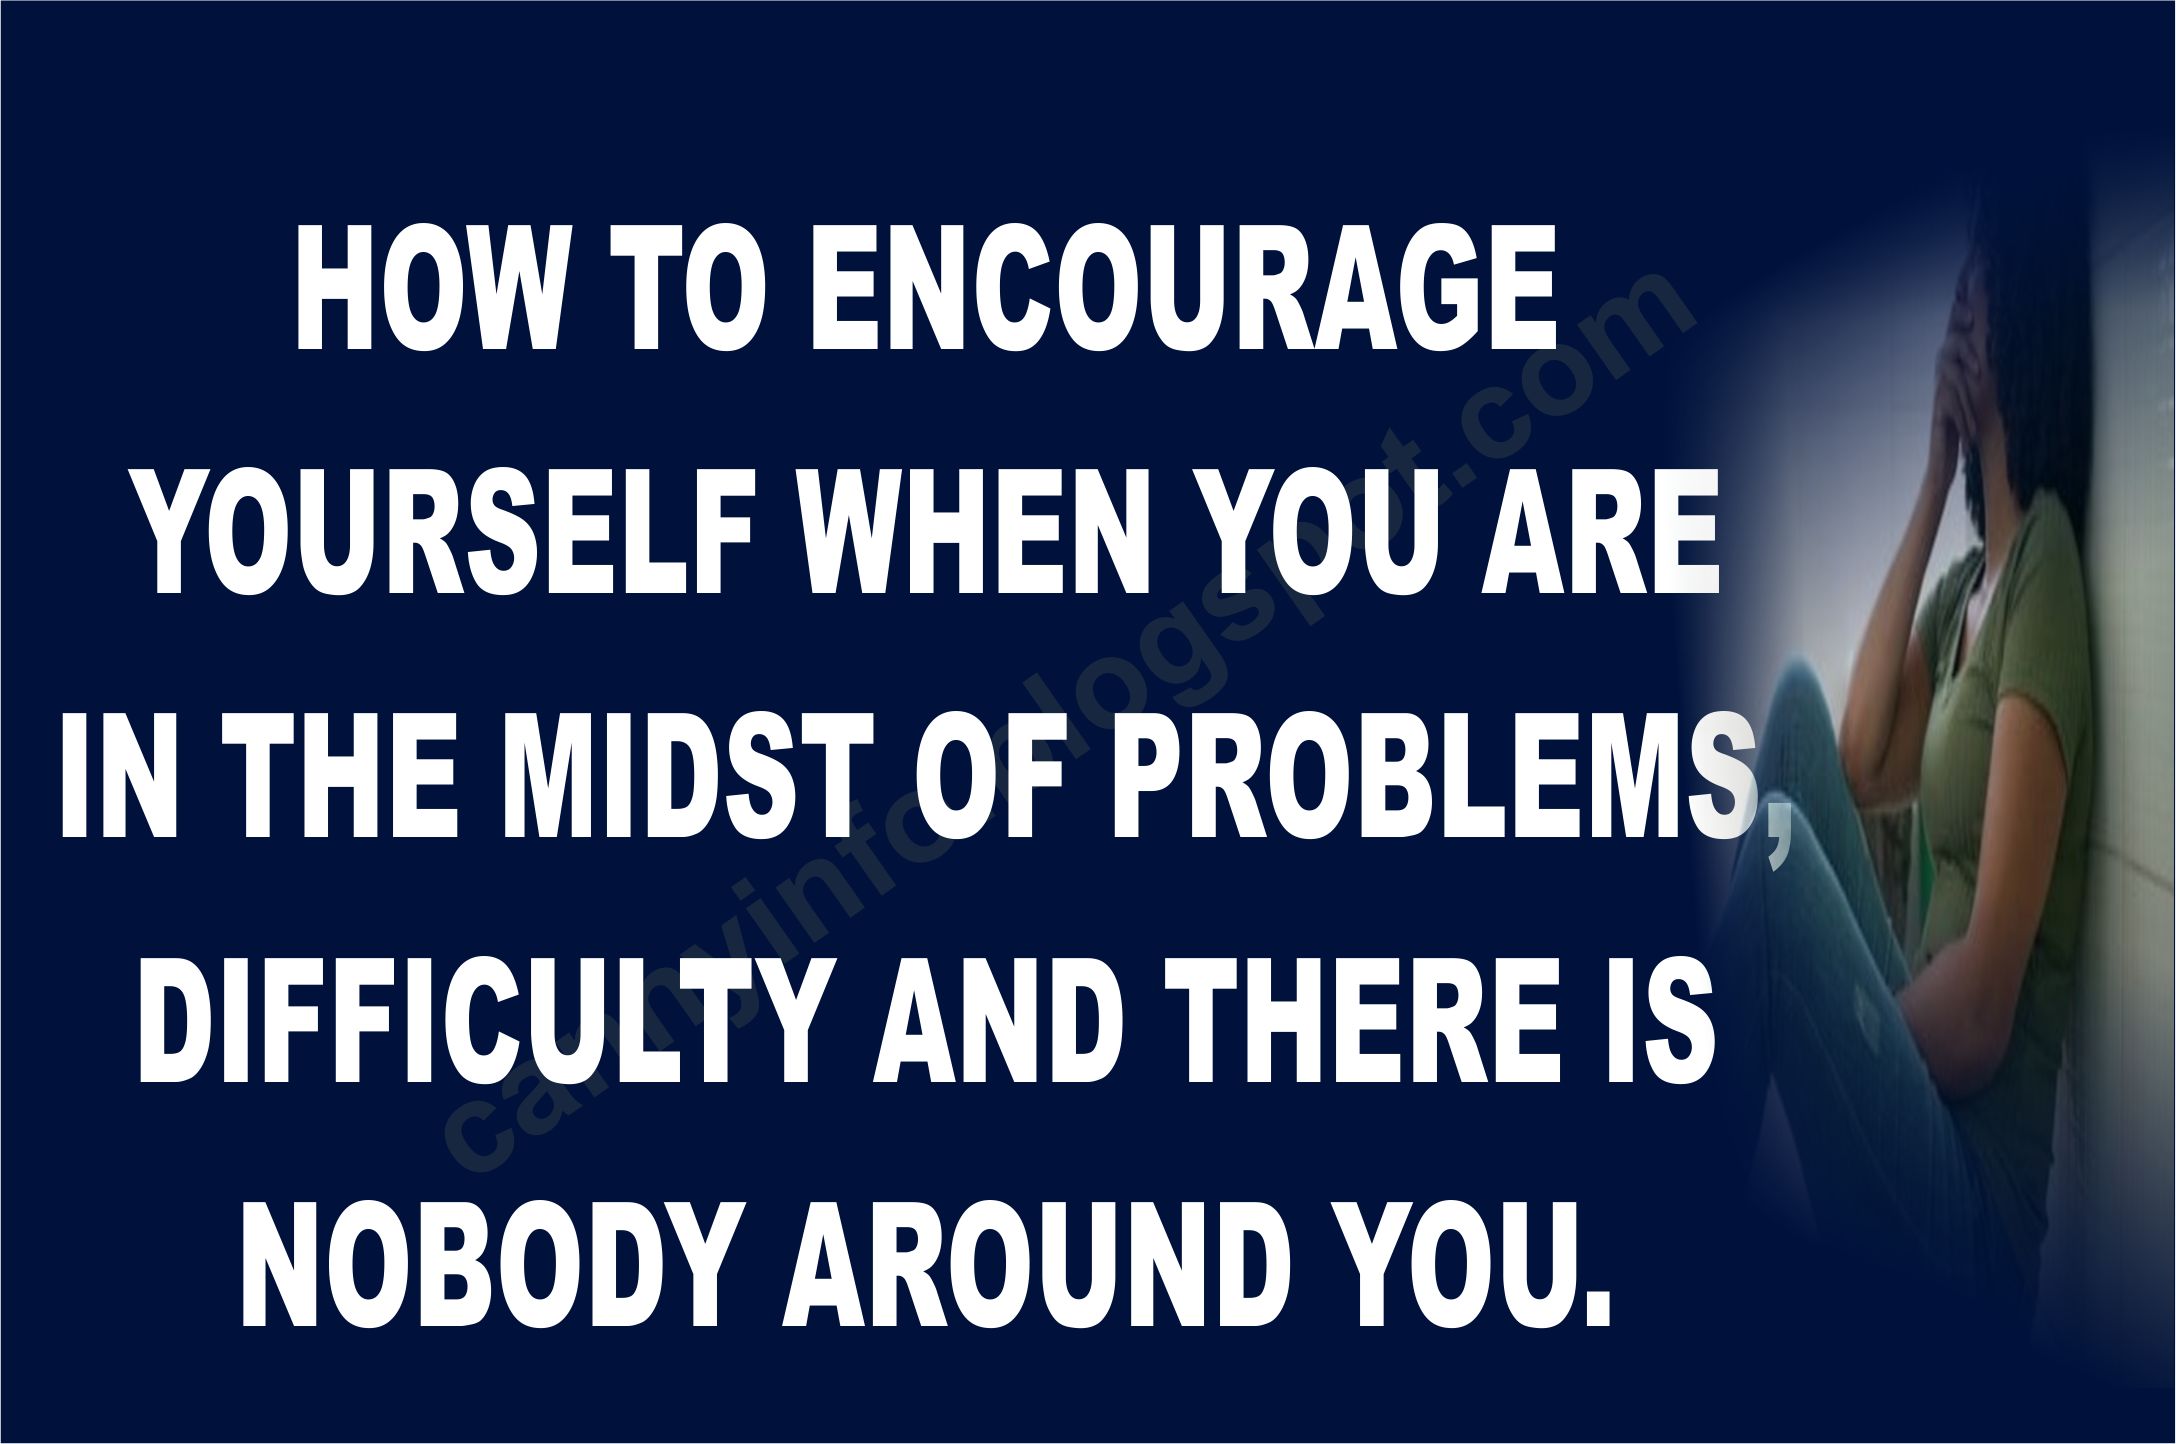 HOW TO ENCOURAGE YOURSELF WHEN YOU ARE IN THE MIDST OF PROBLEMS, DIFFICULTY AND THERE IS NOBODY AROUND YOU.